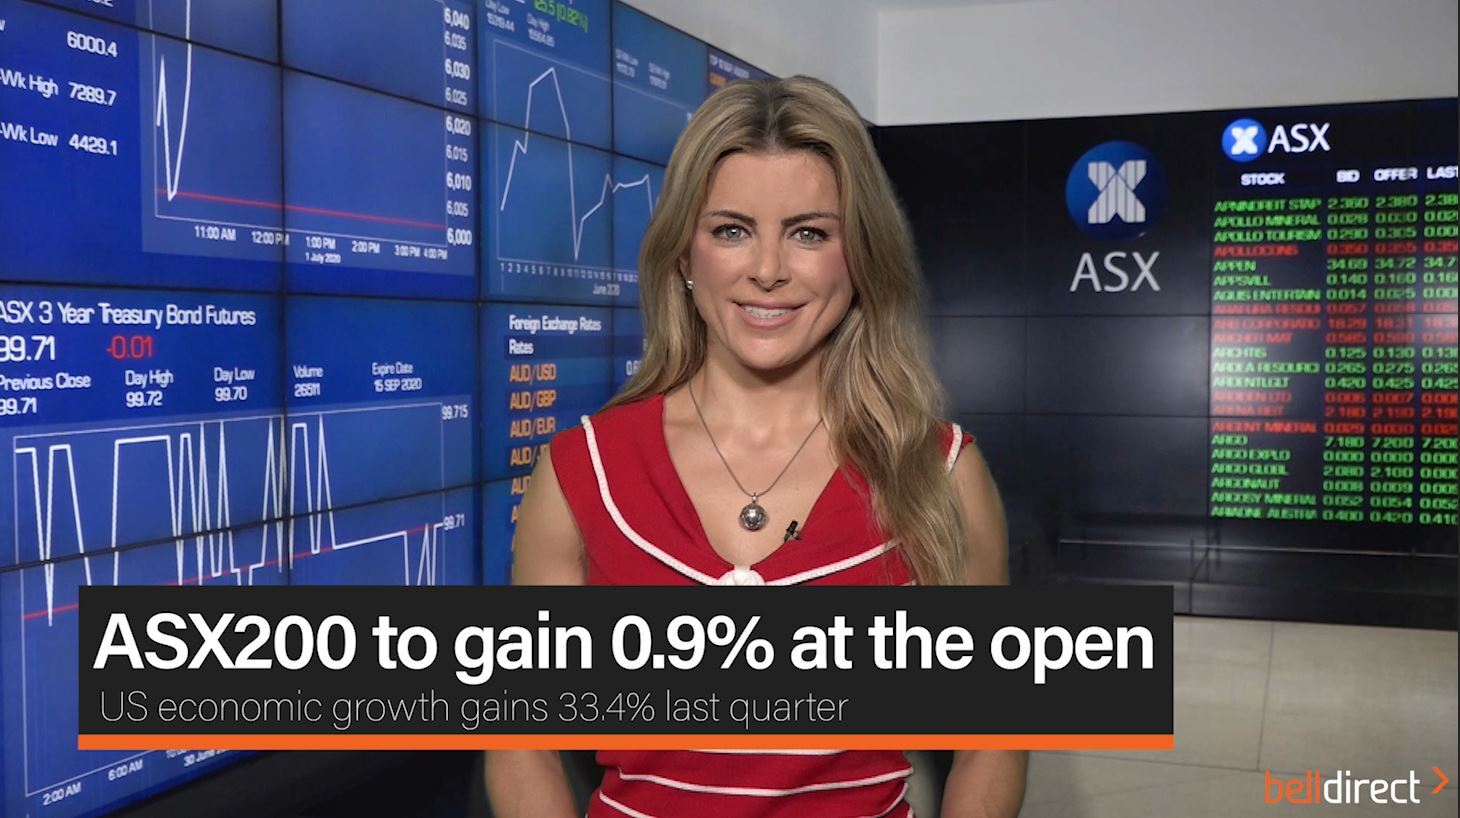 ASX200 to gain 0.9% at the open